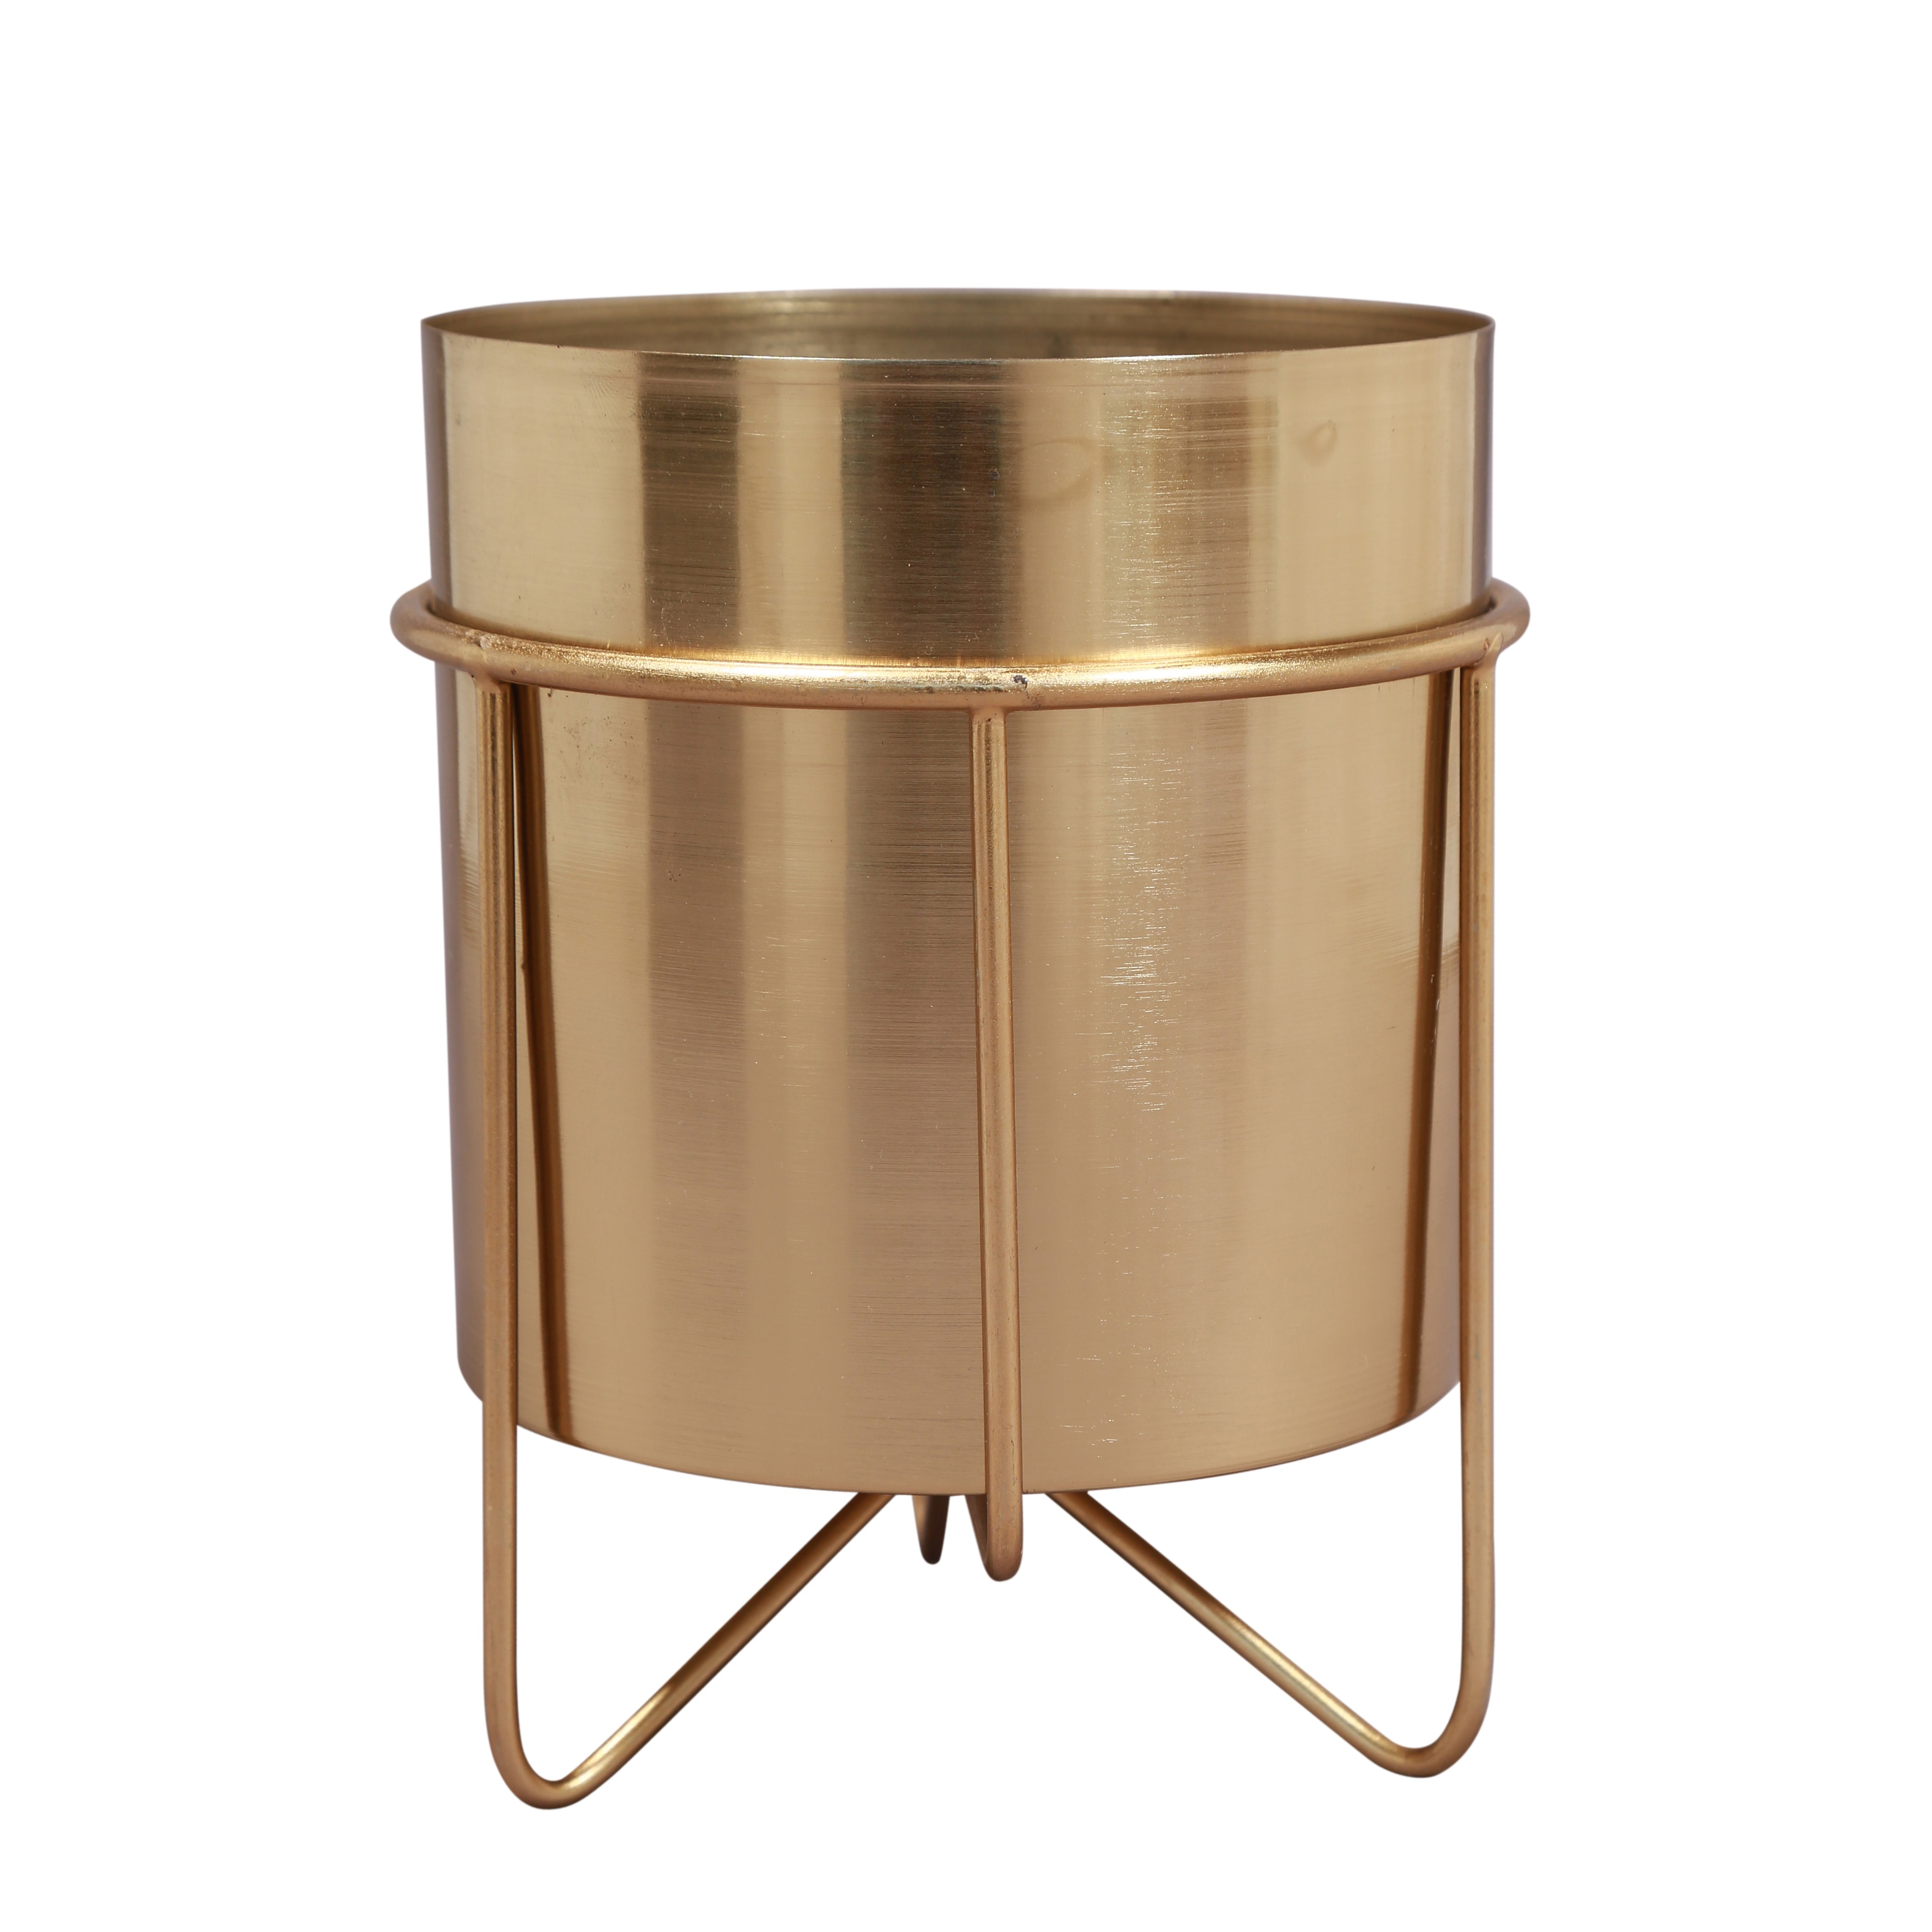 Waves Golden Metal Planter with Stand 11 inches tall